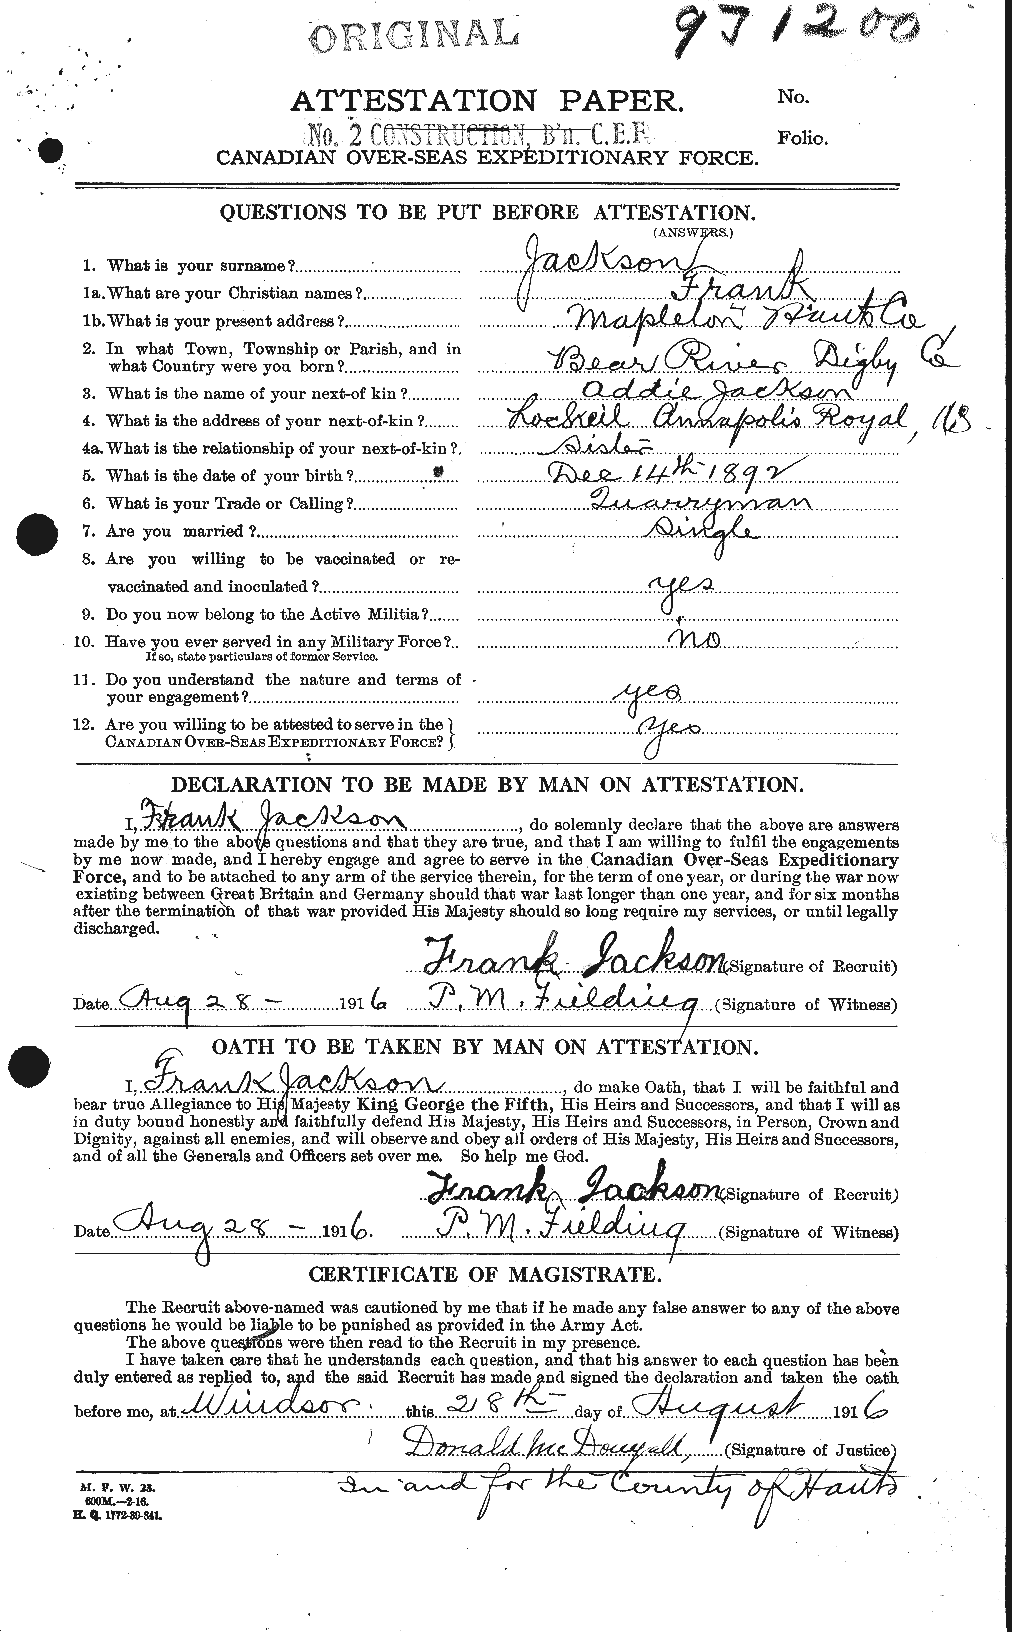 Personnel Records of the First World War - CEF 413451a